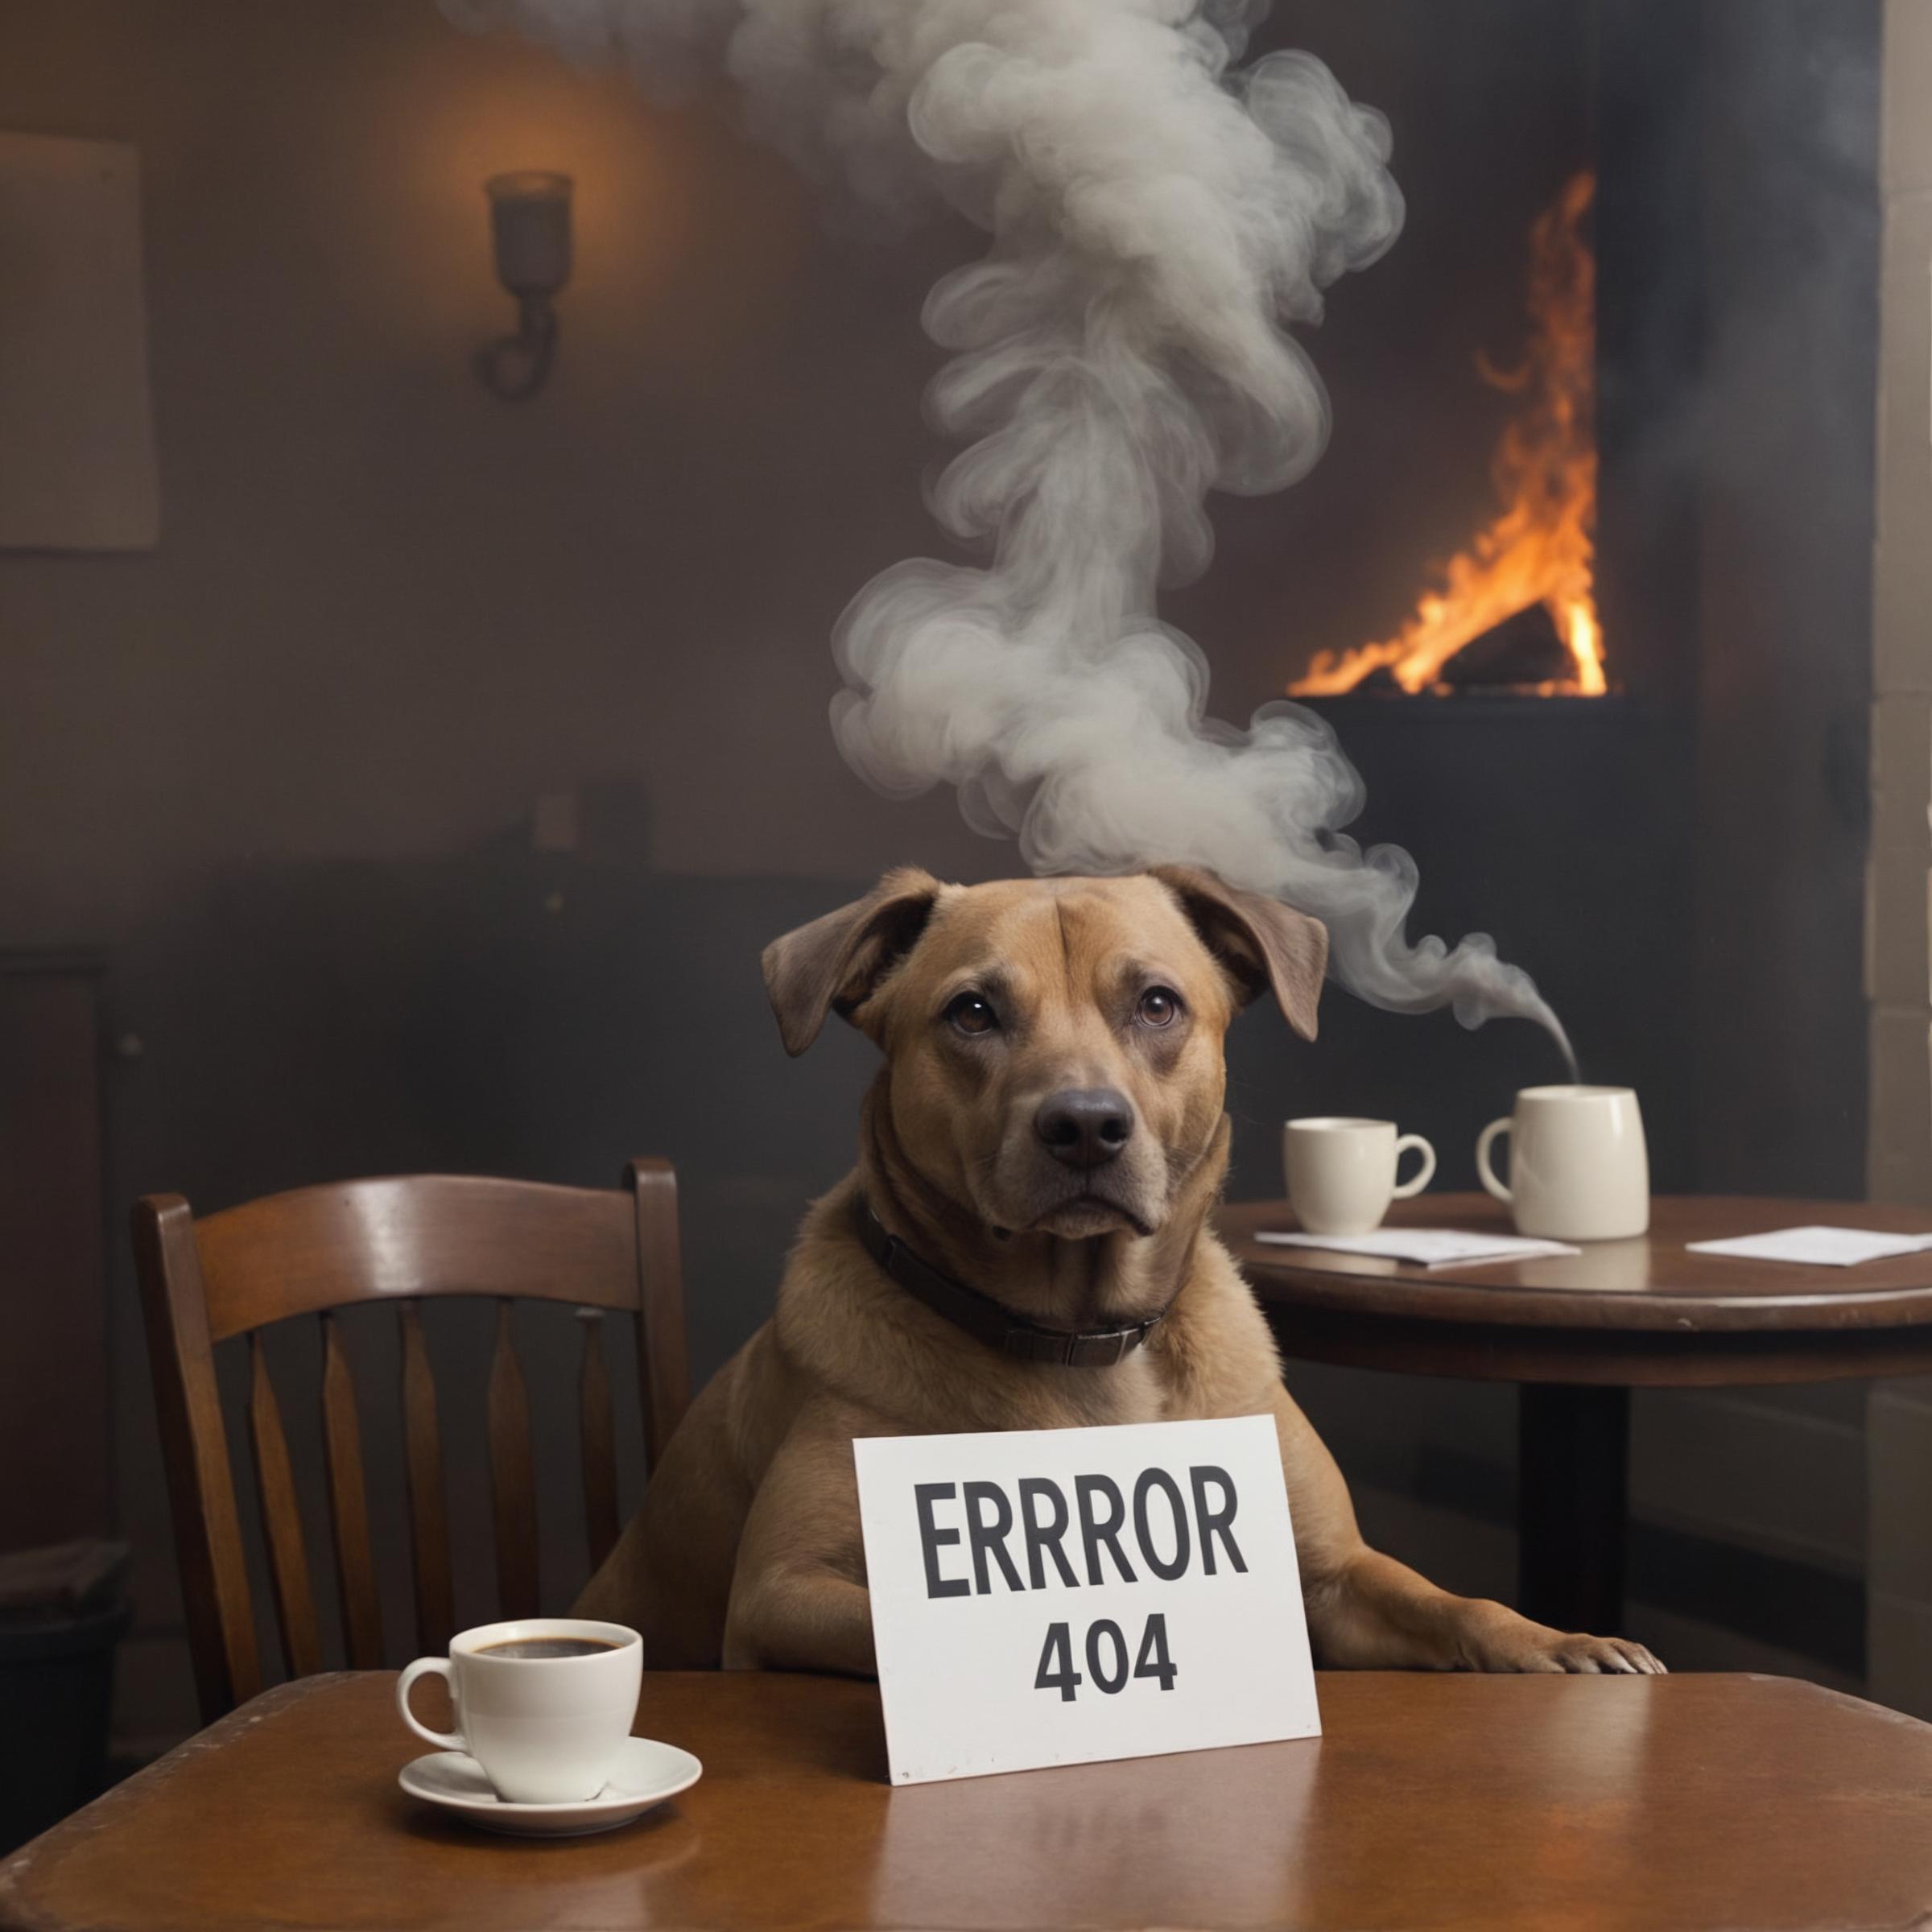 A dog sitting in front of a sign that says "Error 404" with a cup of coffee on the table.